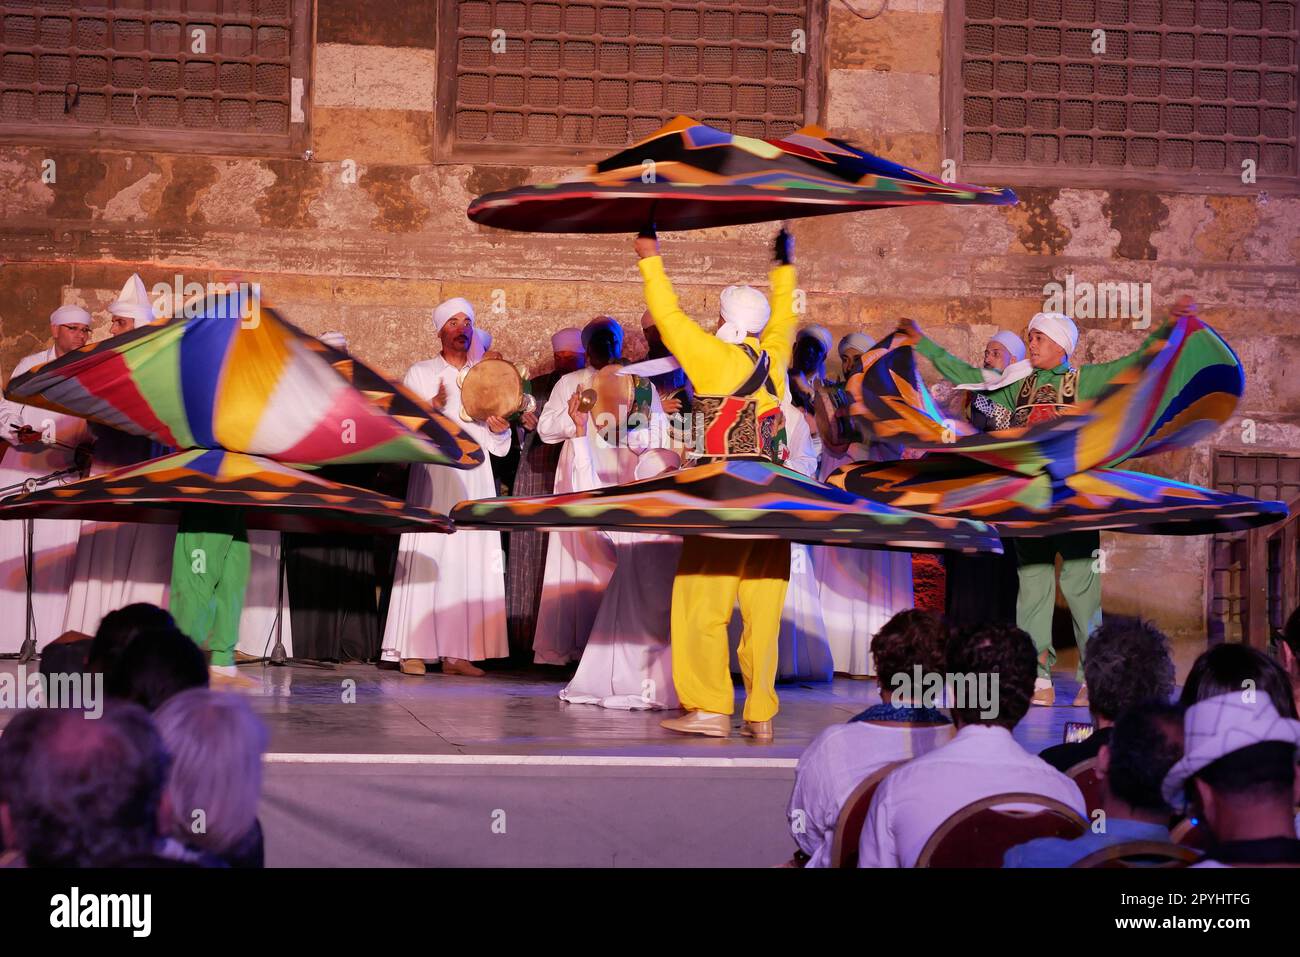 Evening Sufi whirling dervish dance performance in the Islamic quarter in Cairo Stock Photo